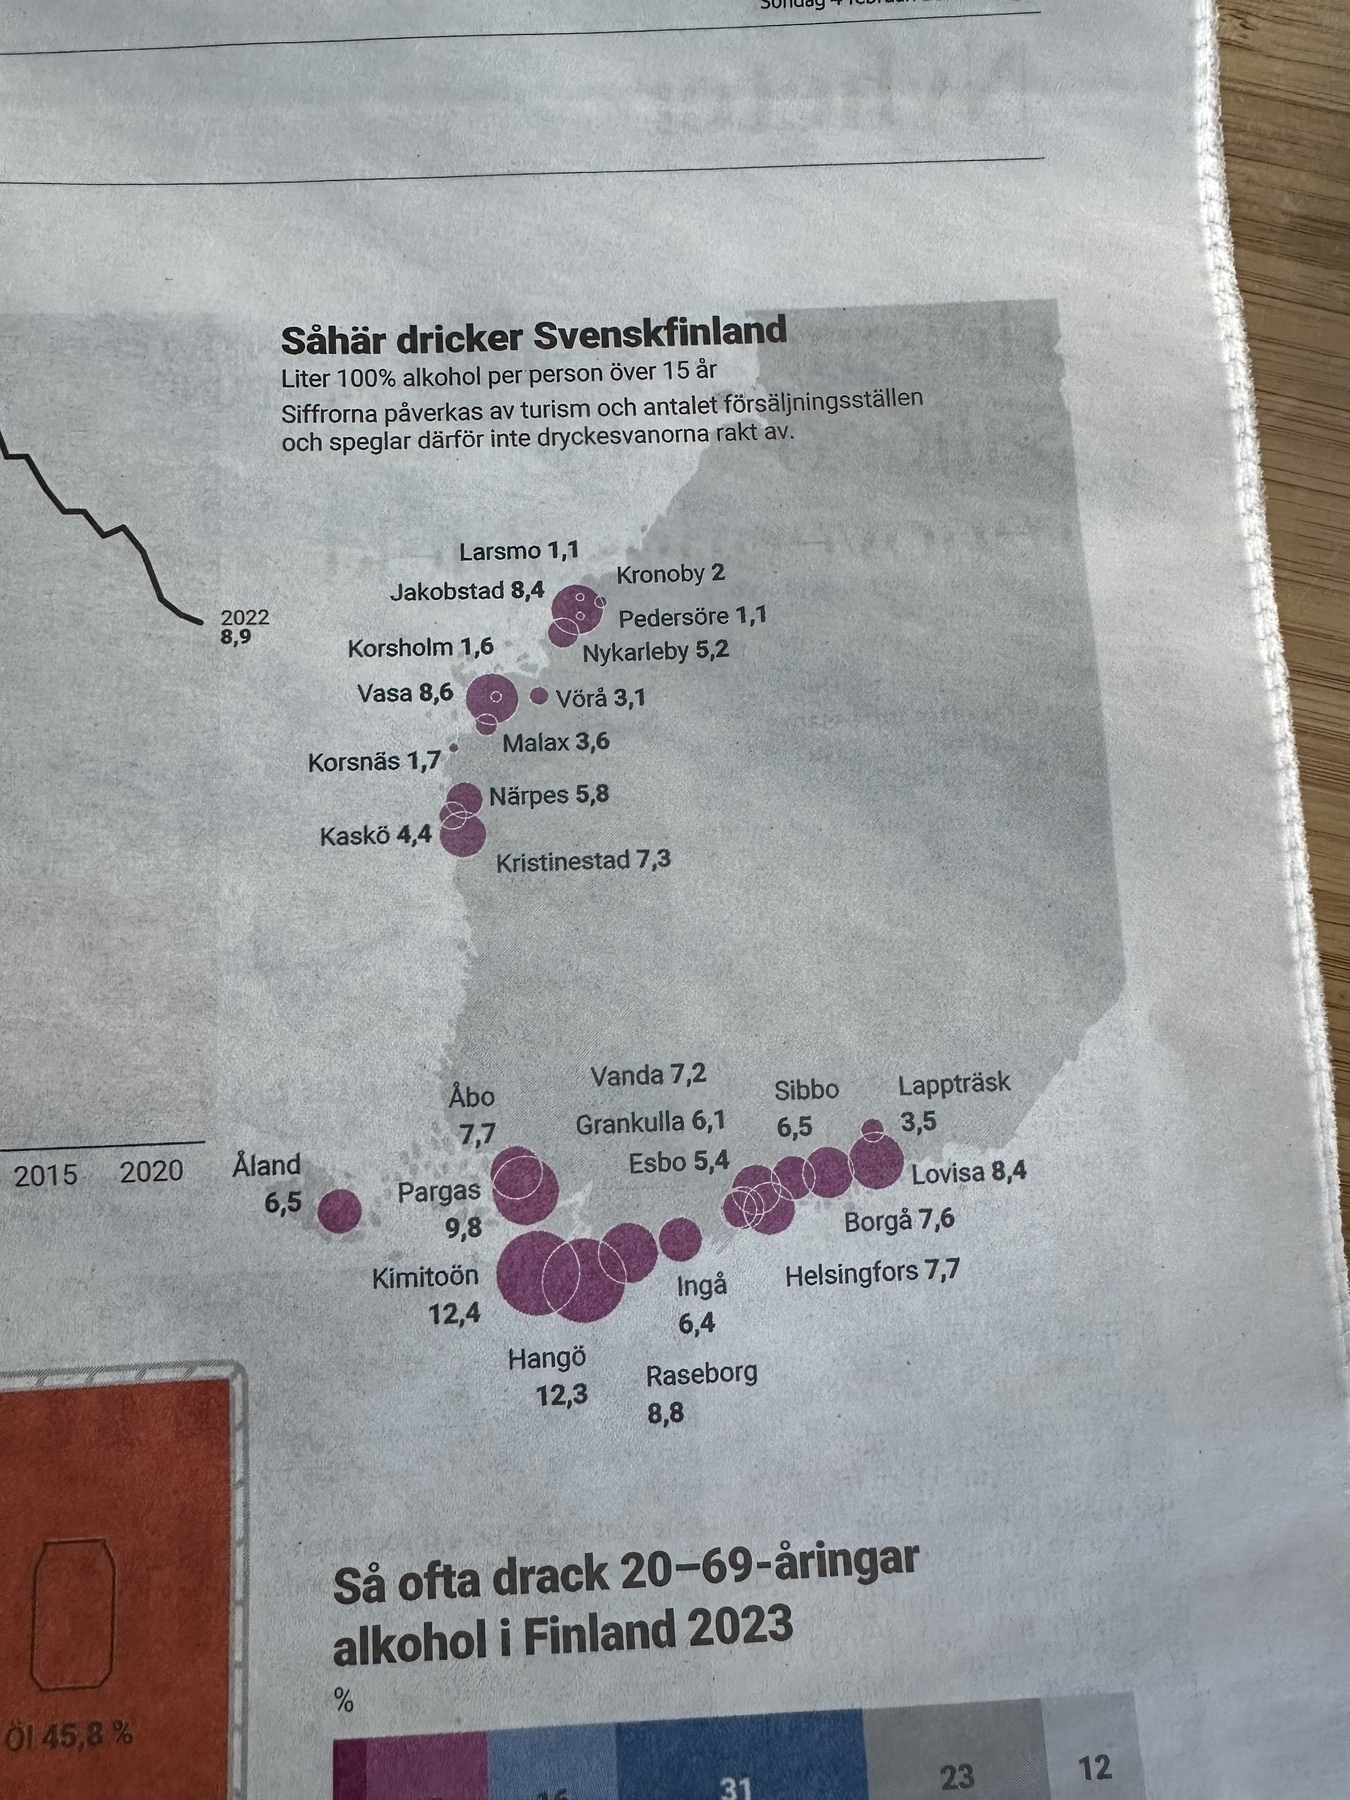 Take from a Swedish language newspaper. Map of Finland covering the Finnish Swedish areas and their alcohol consumption. One can see the difference in touristy areas in the south and more religious areas around Vaasa